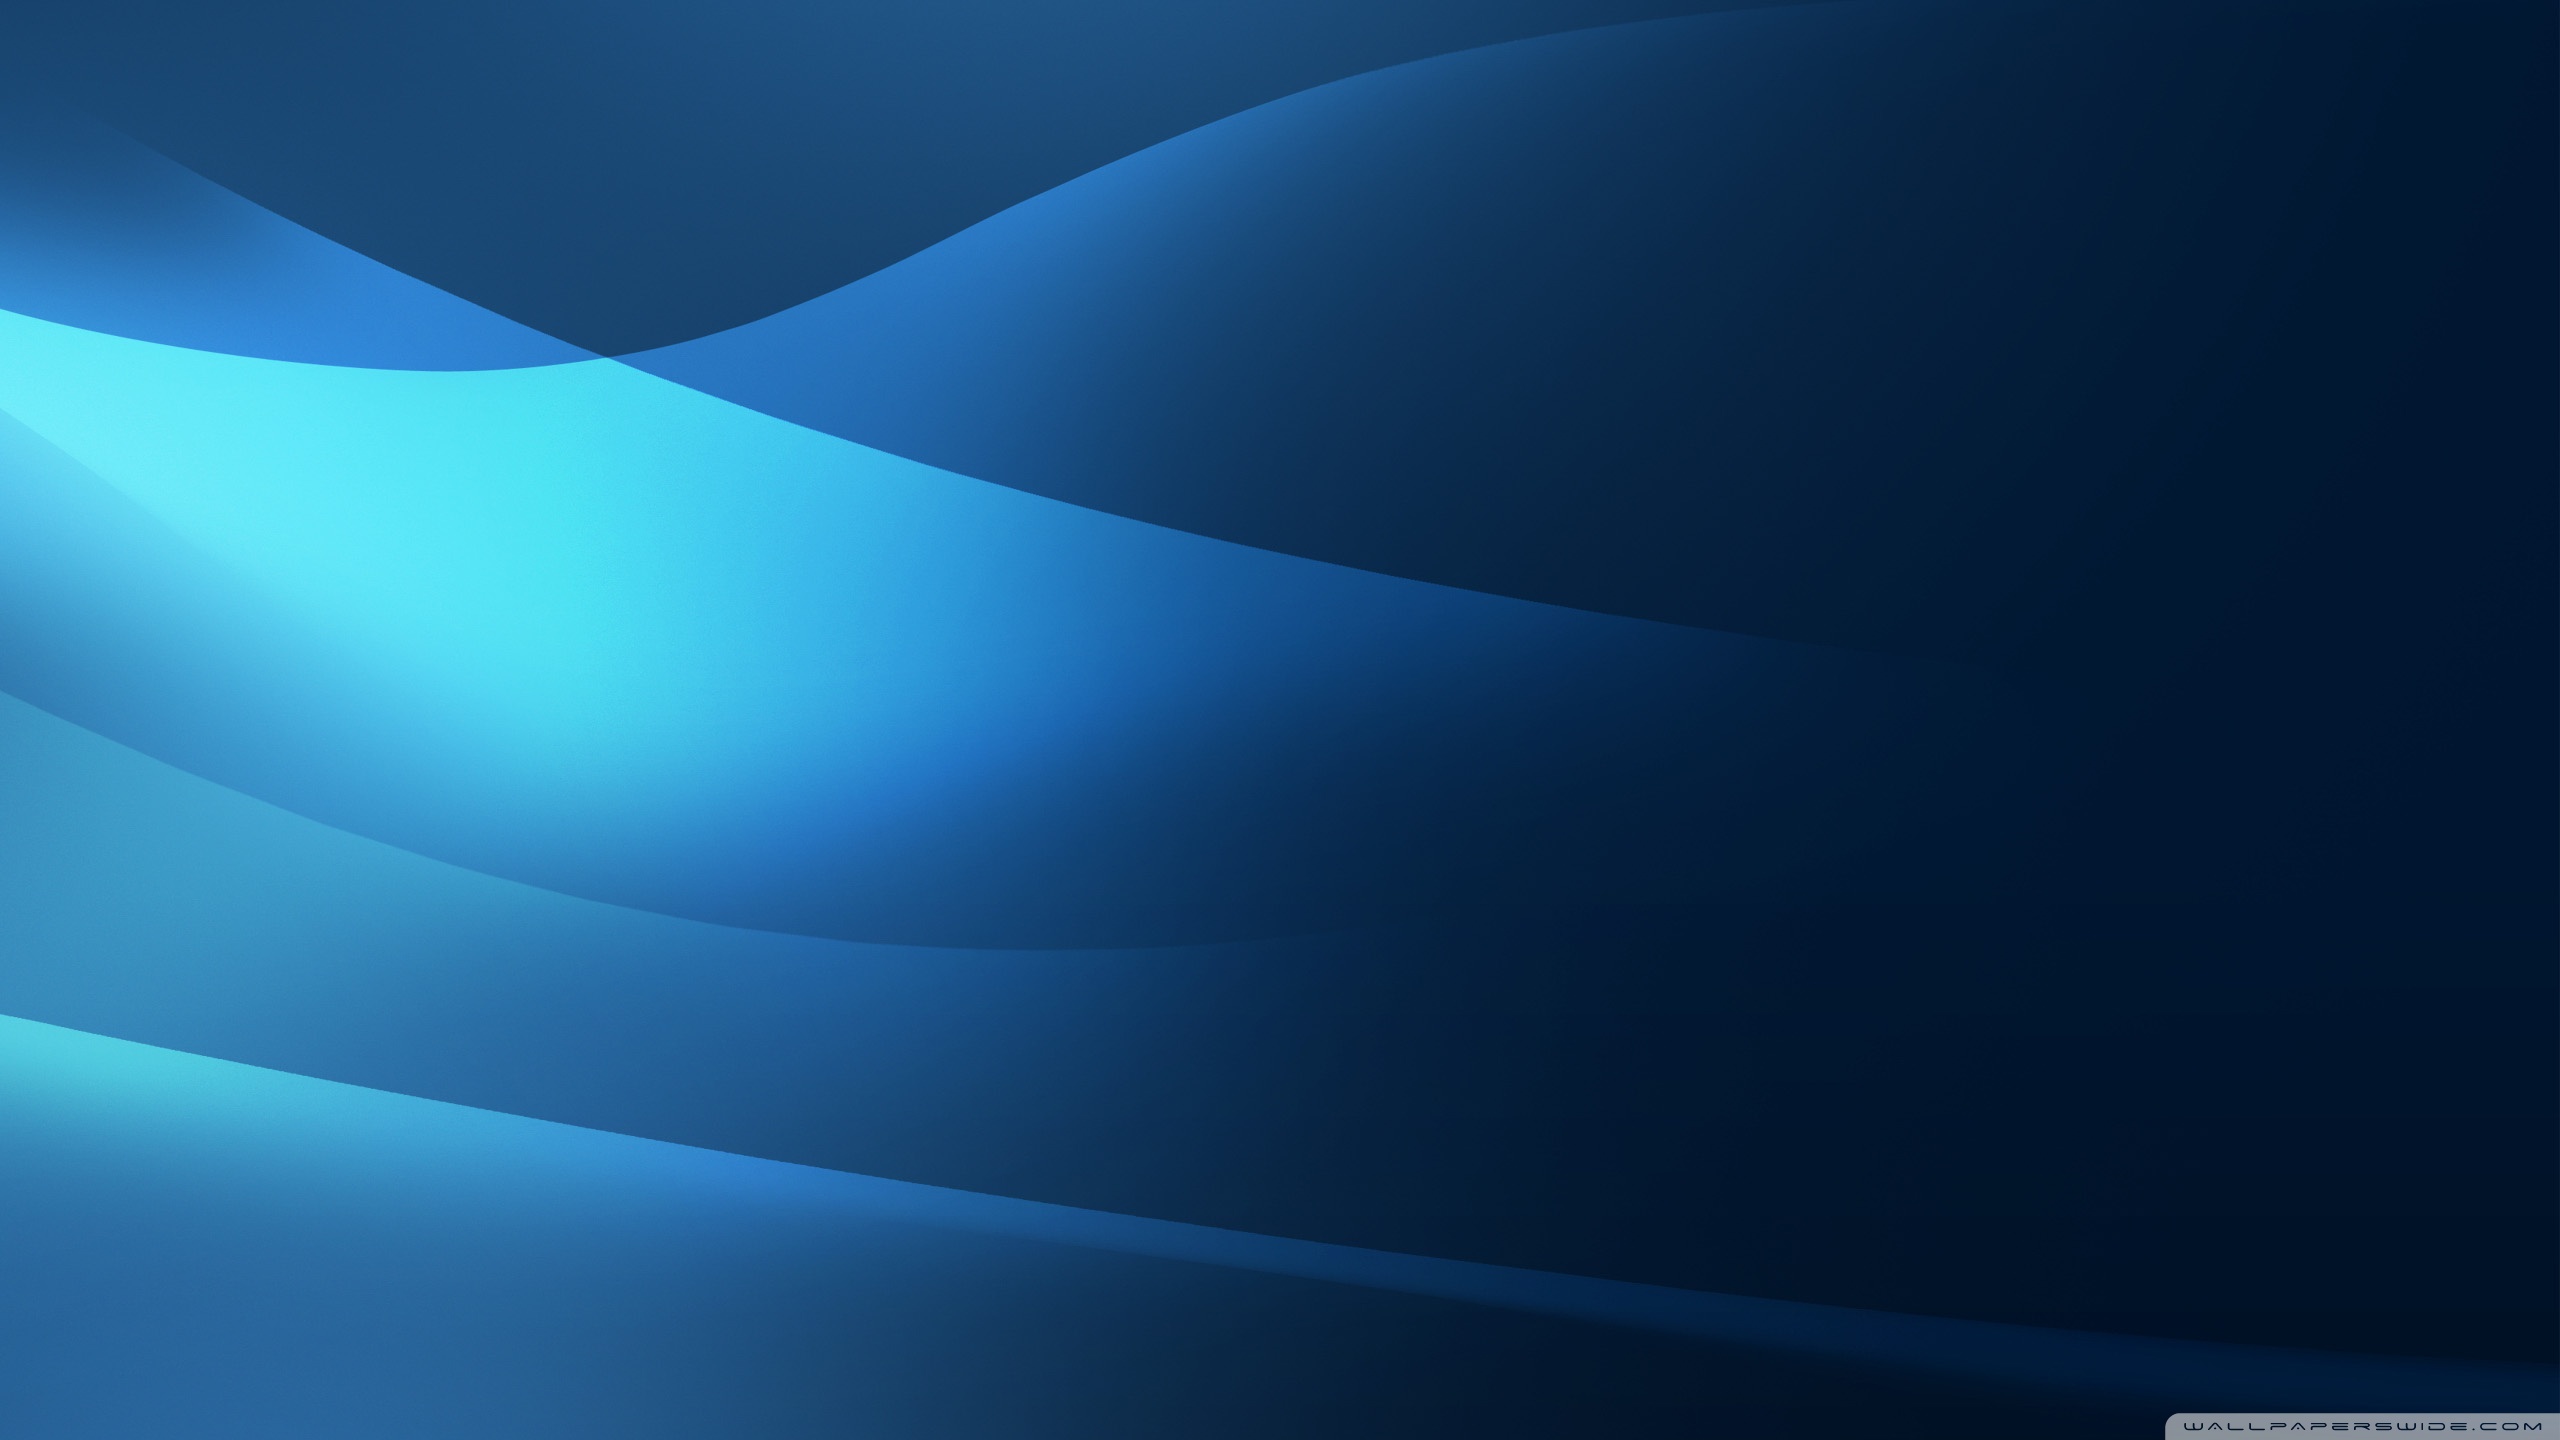 High Resolution Abstract Blue Background 2400x1350 Wallpaper Teahub Io